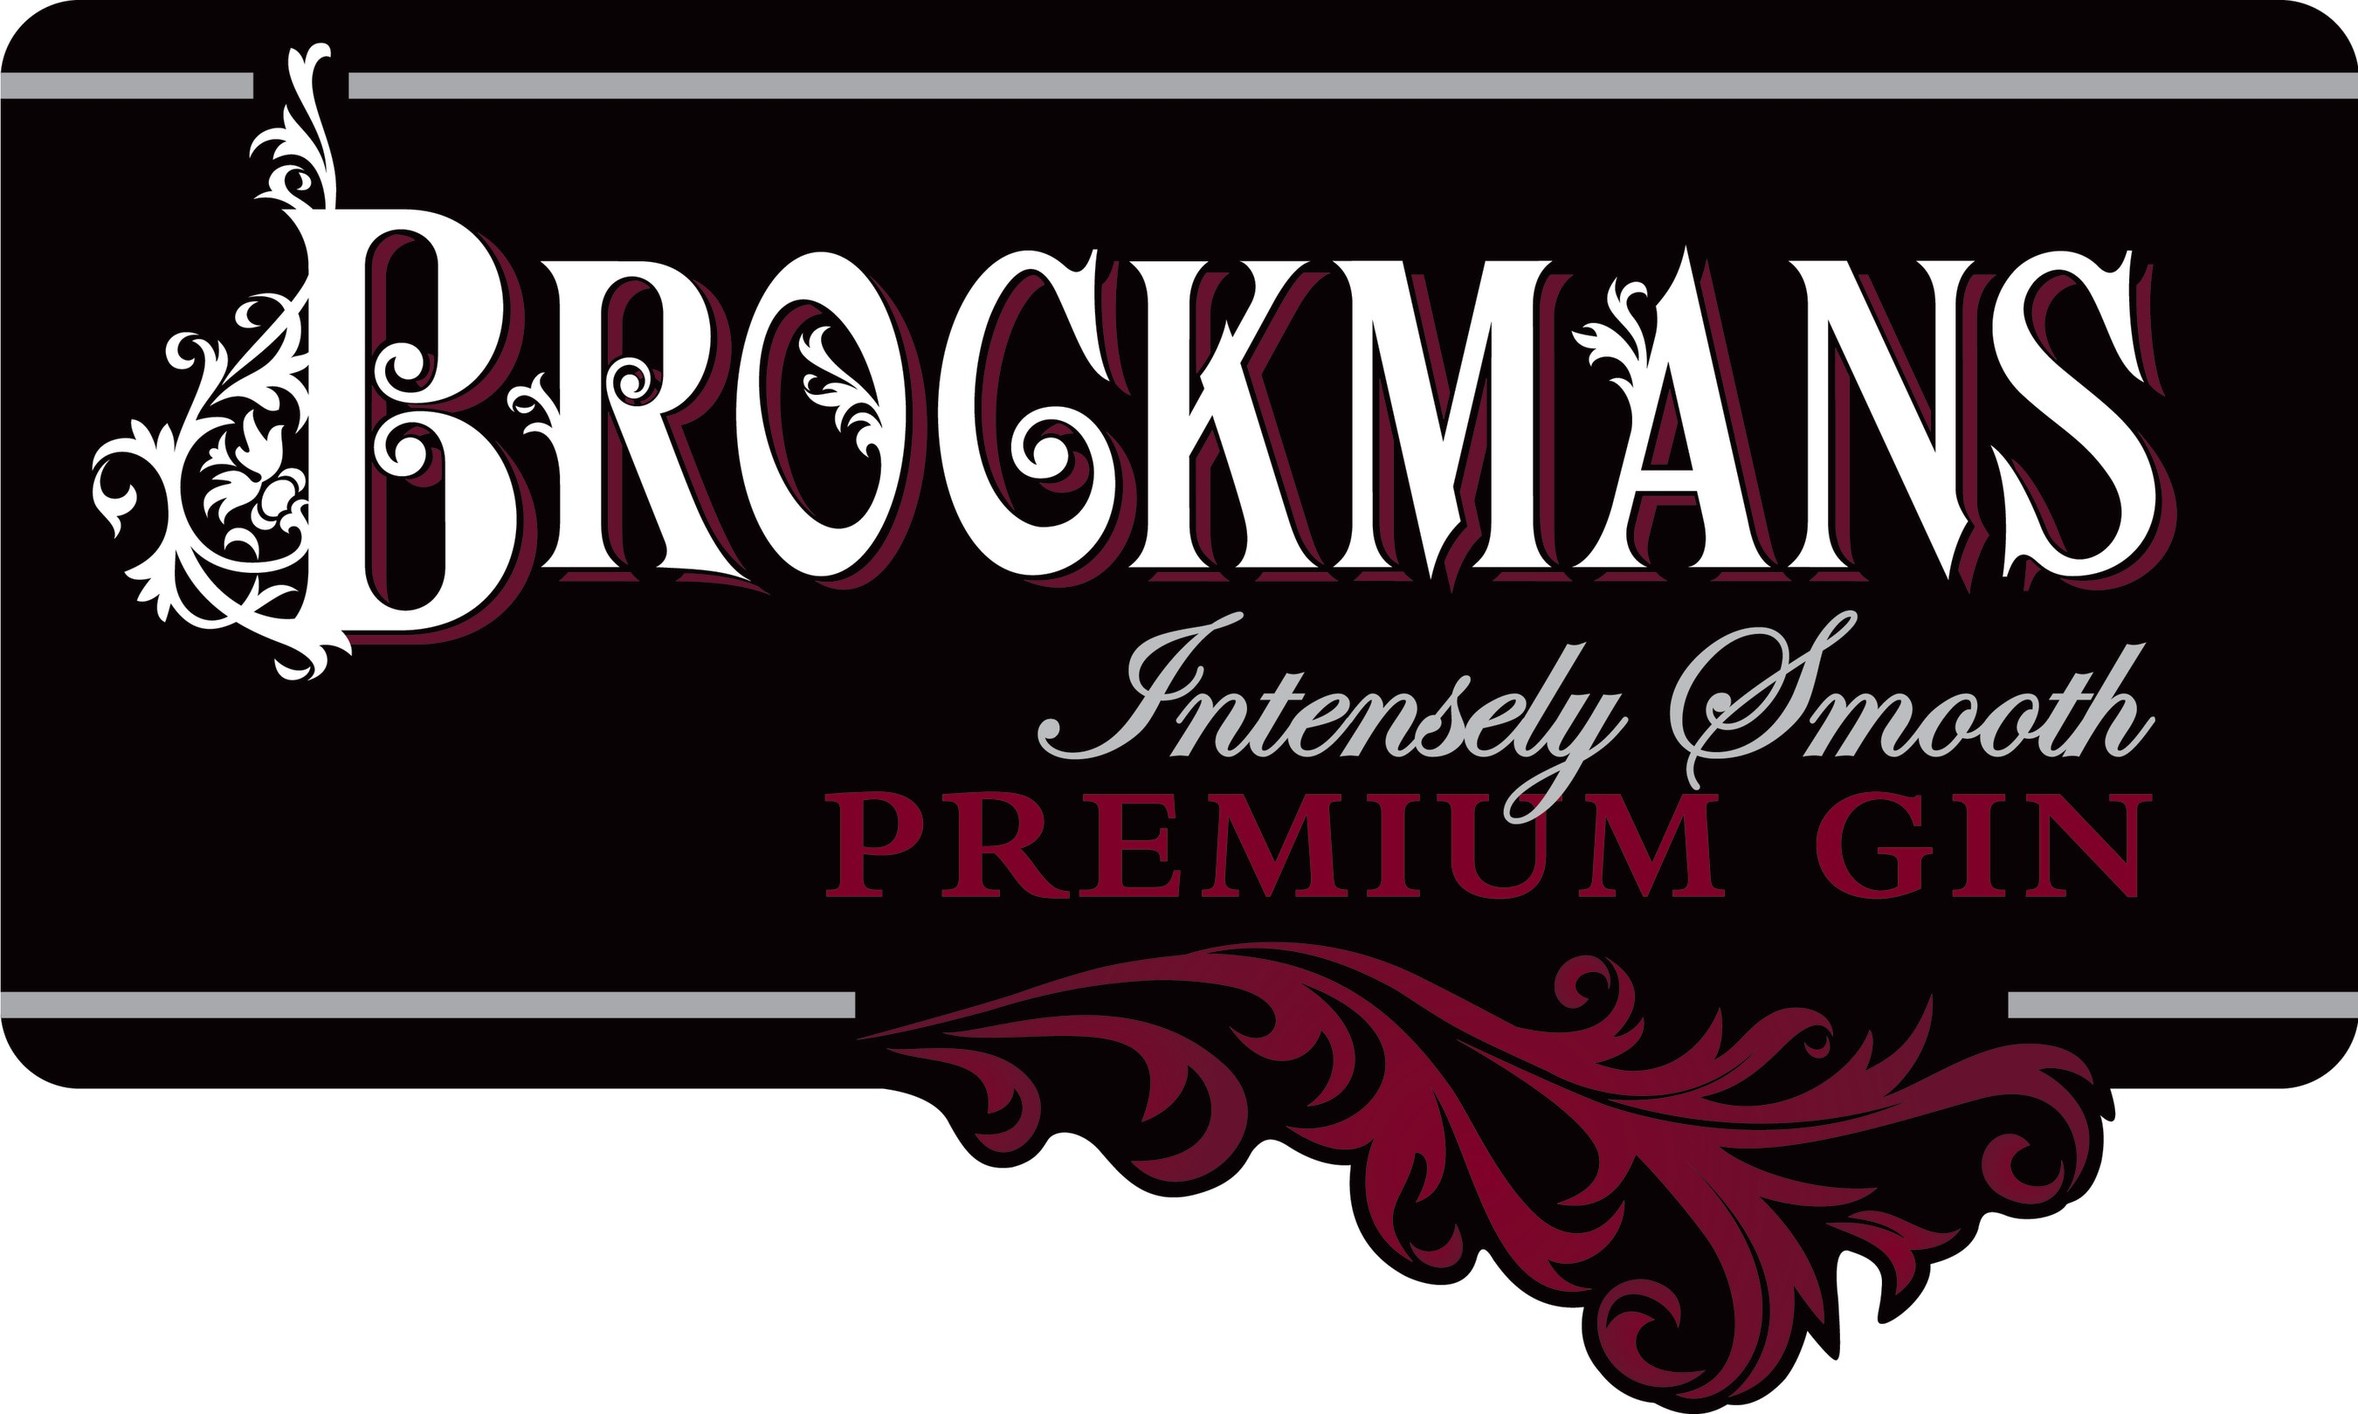 Celebrate The Season In Style With Brockmans Original Summer Cocktails photo